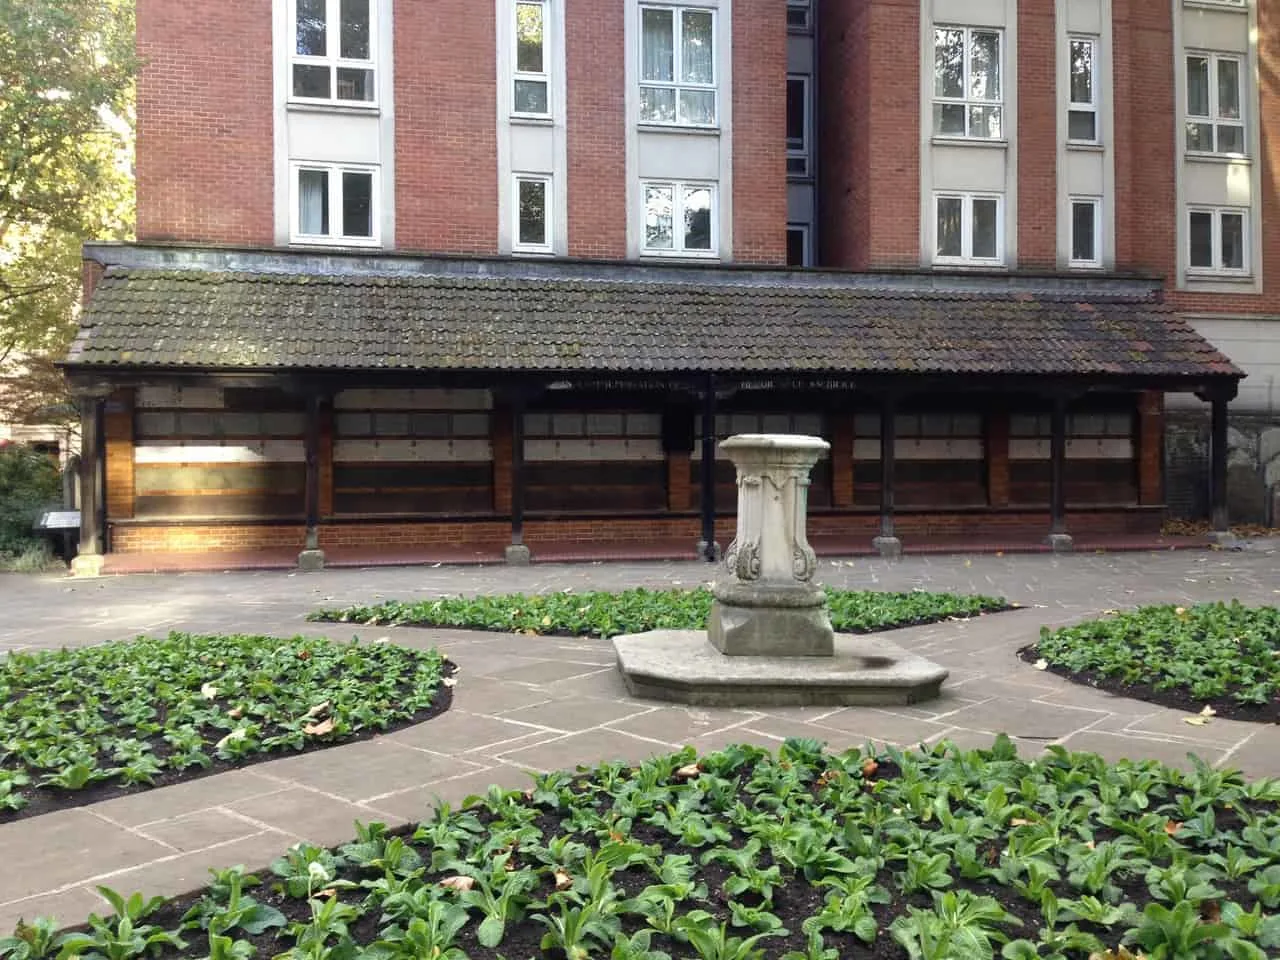 Pay tribute to the everyday citizens who are honored at Postman's Park in London. 